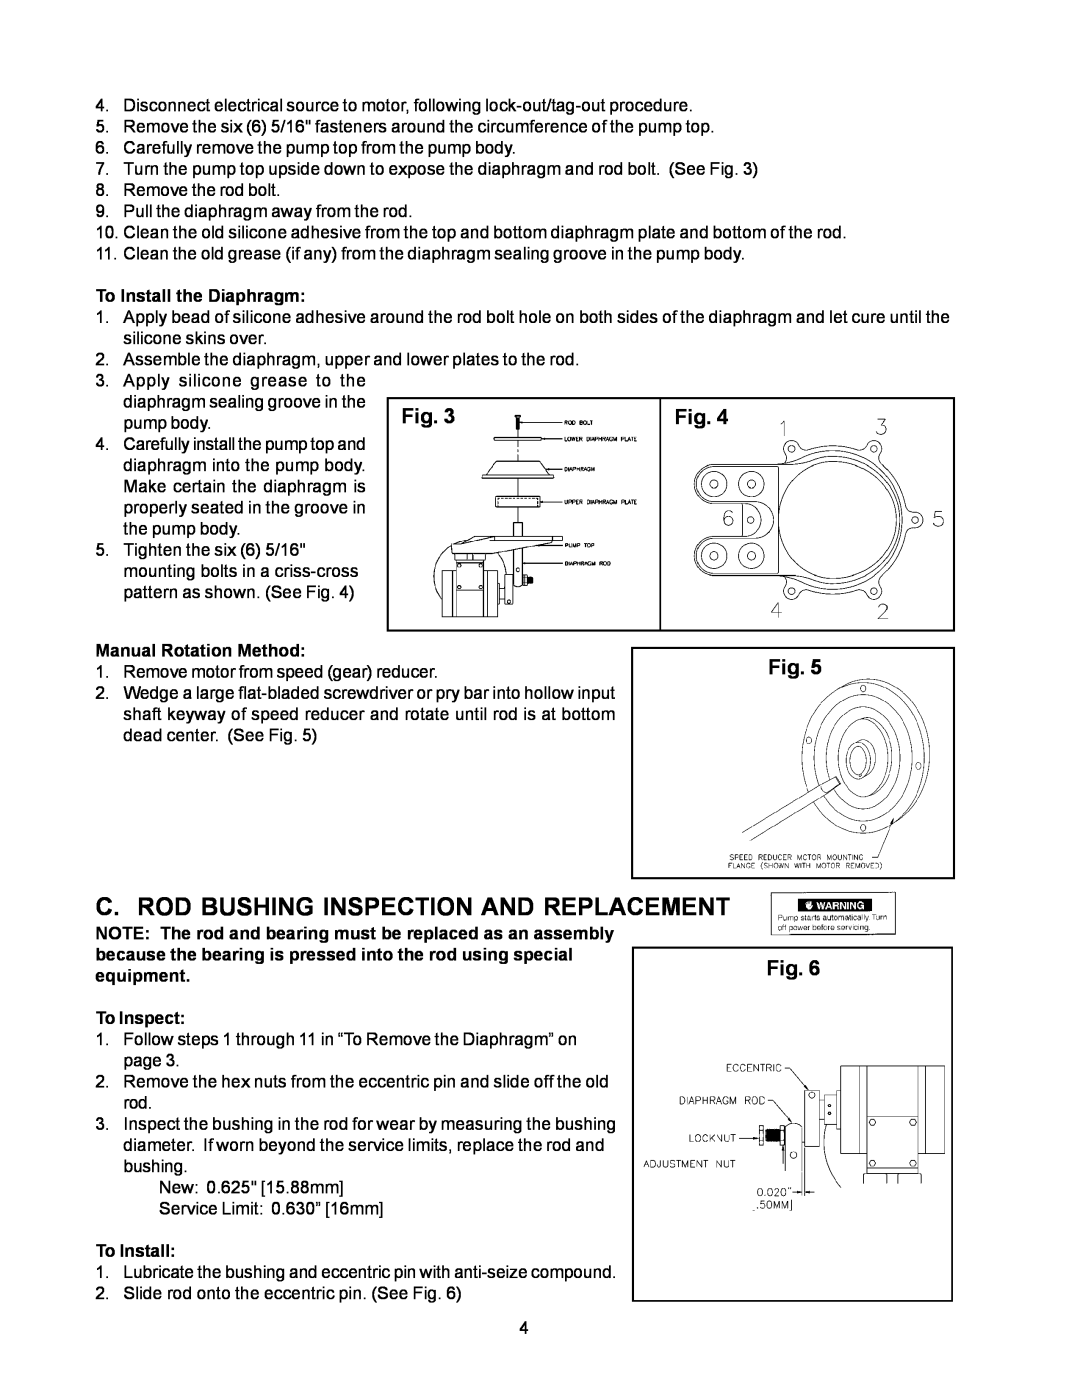 SeaLand Vacuum Pump owner manual C. Rod Bushing Inspection And Replacement 